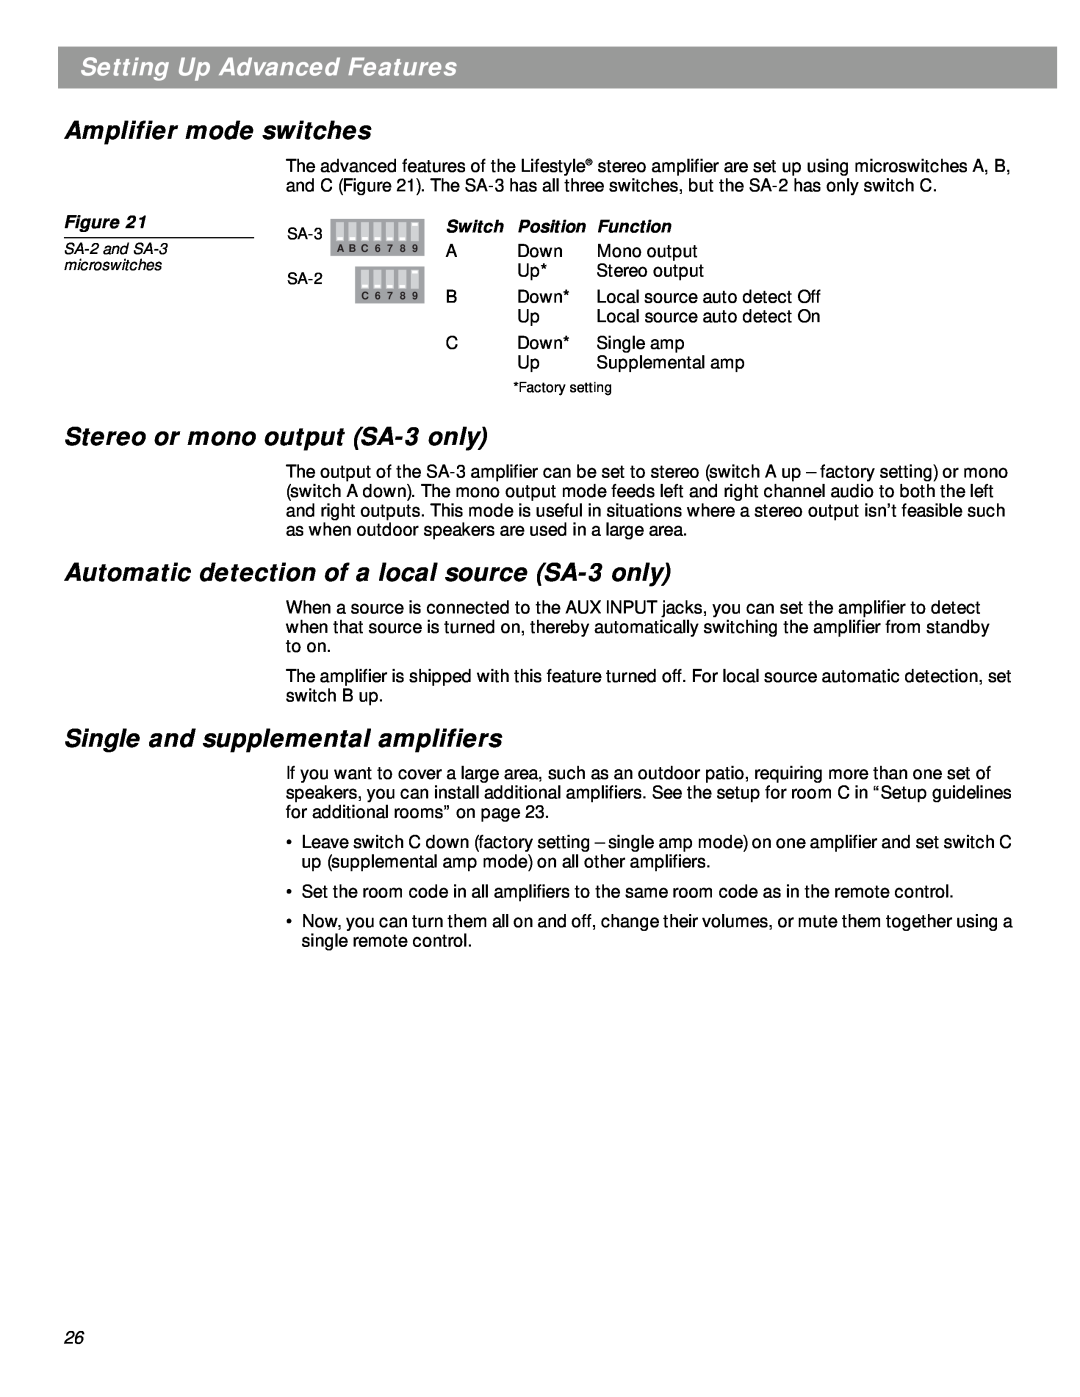 Bose manual Setting Up Advanced Features, Amplifier mode switches, Stereo or mono output SA-3only 